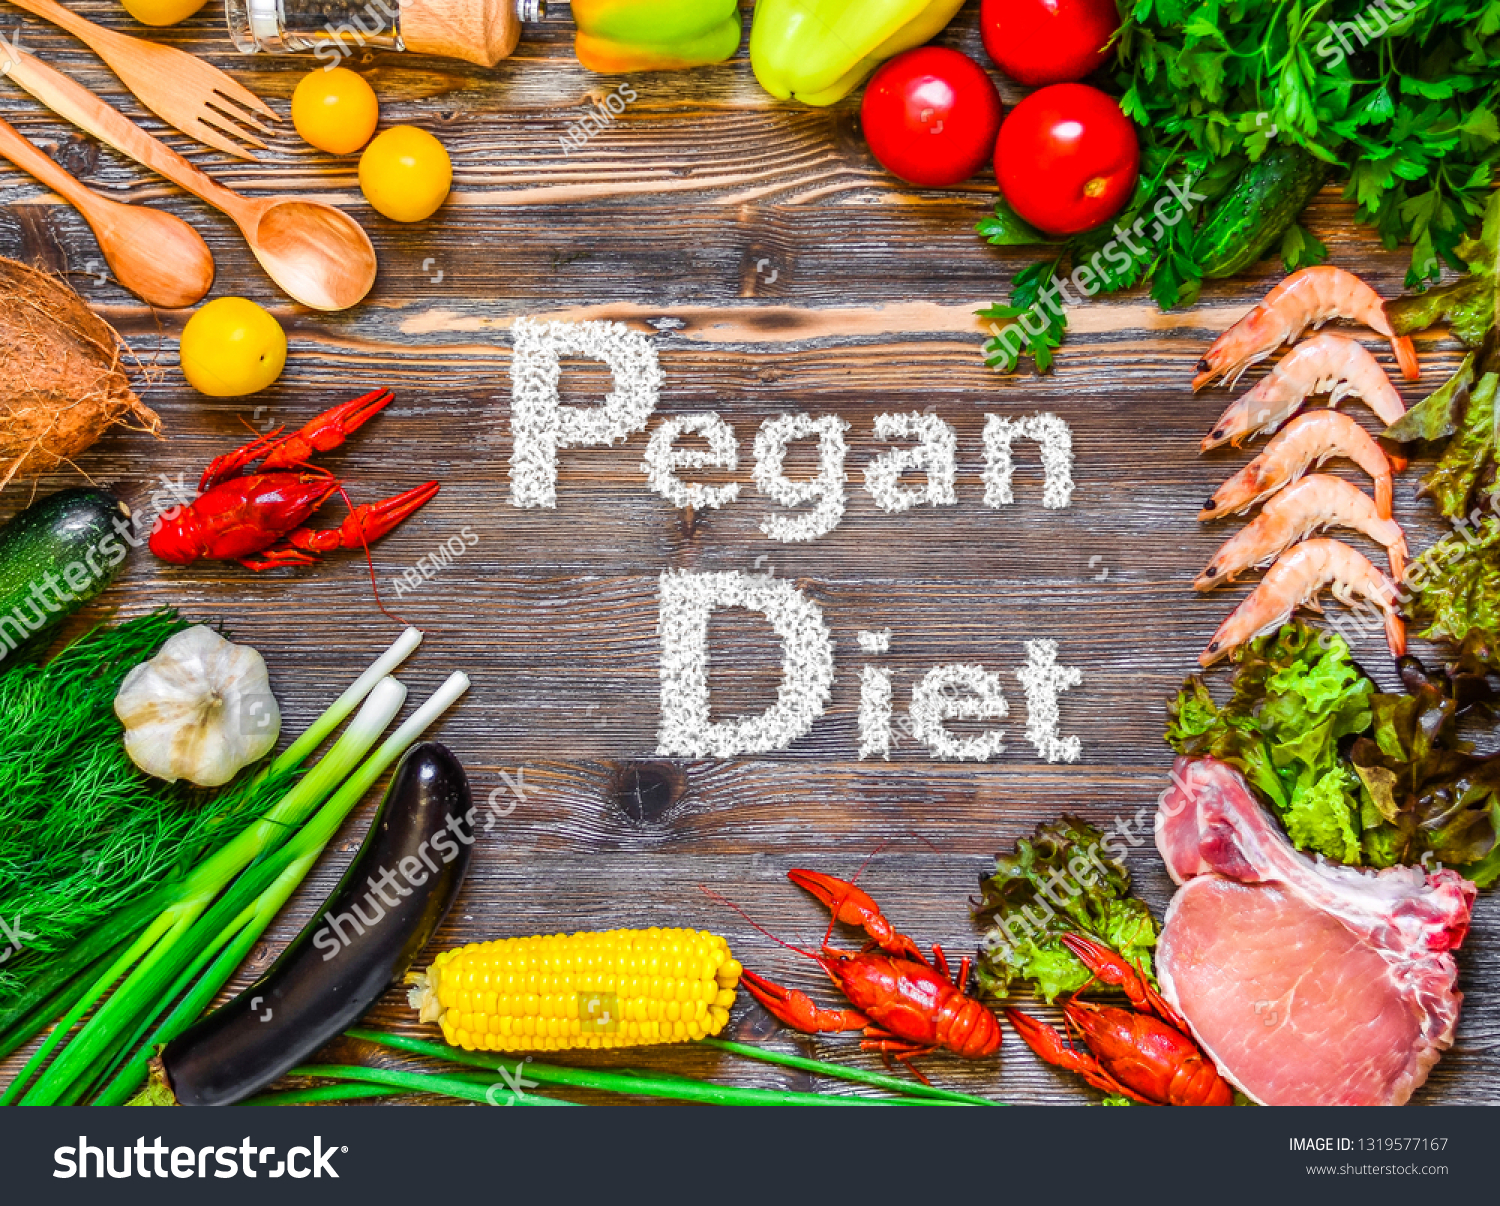 A top view of raw vegetables and meats with the text: Pegan Diet displayed on the wooden table in the middle. Pegan diet is a combination of vegan and paleo diets nutrients. #1319577167